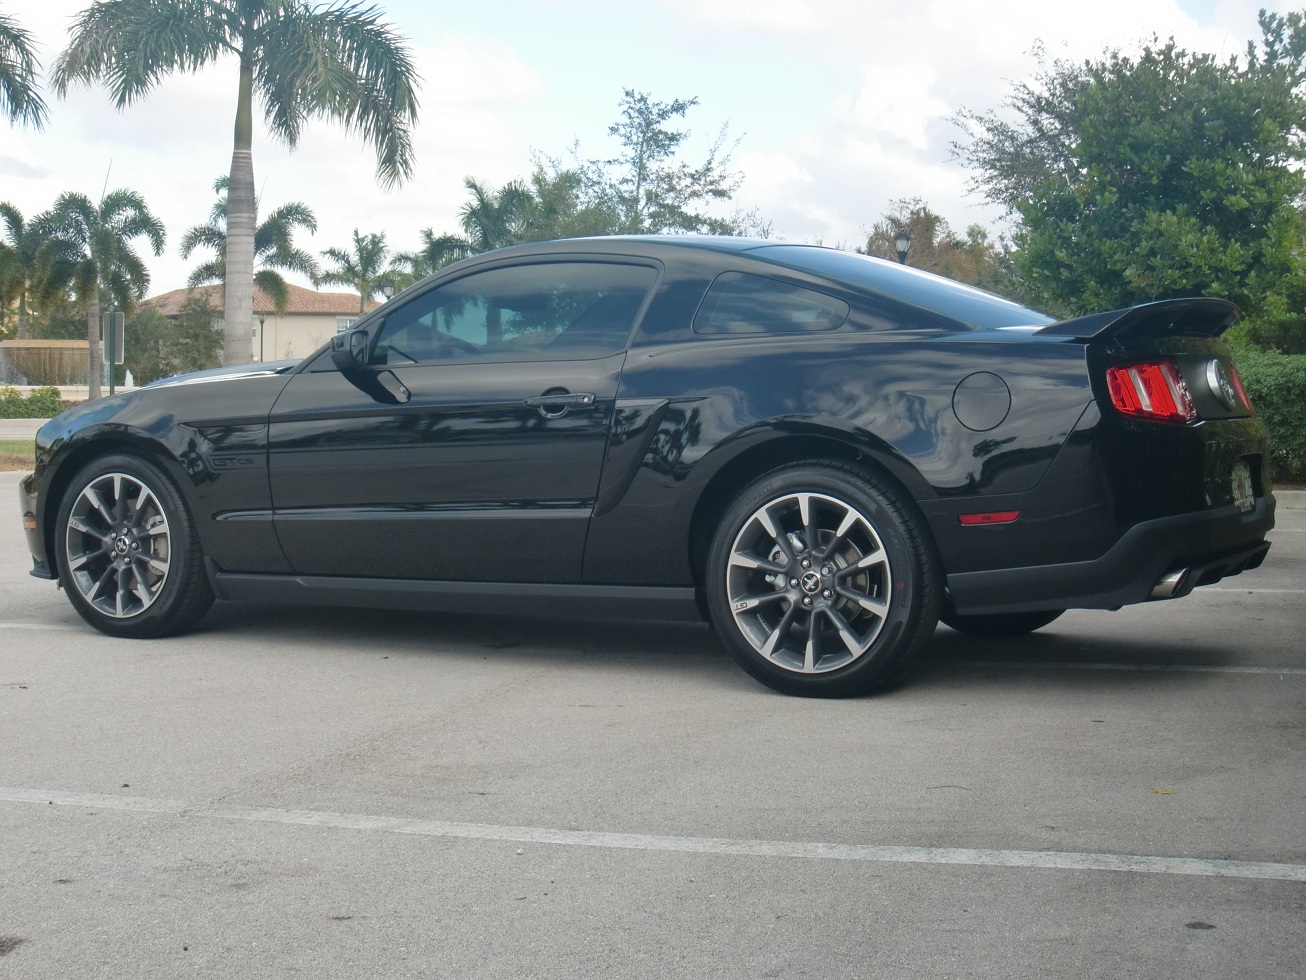 2012 Ford mustang gt quarter mile #5